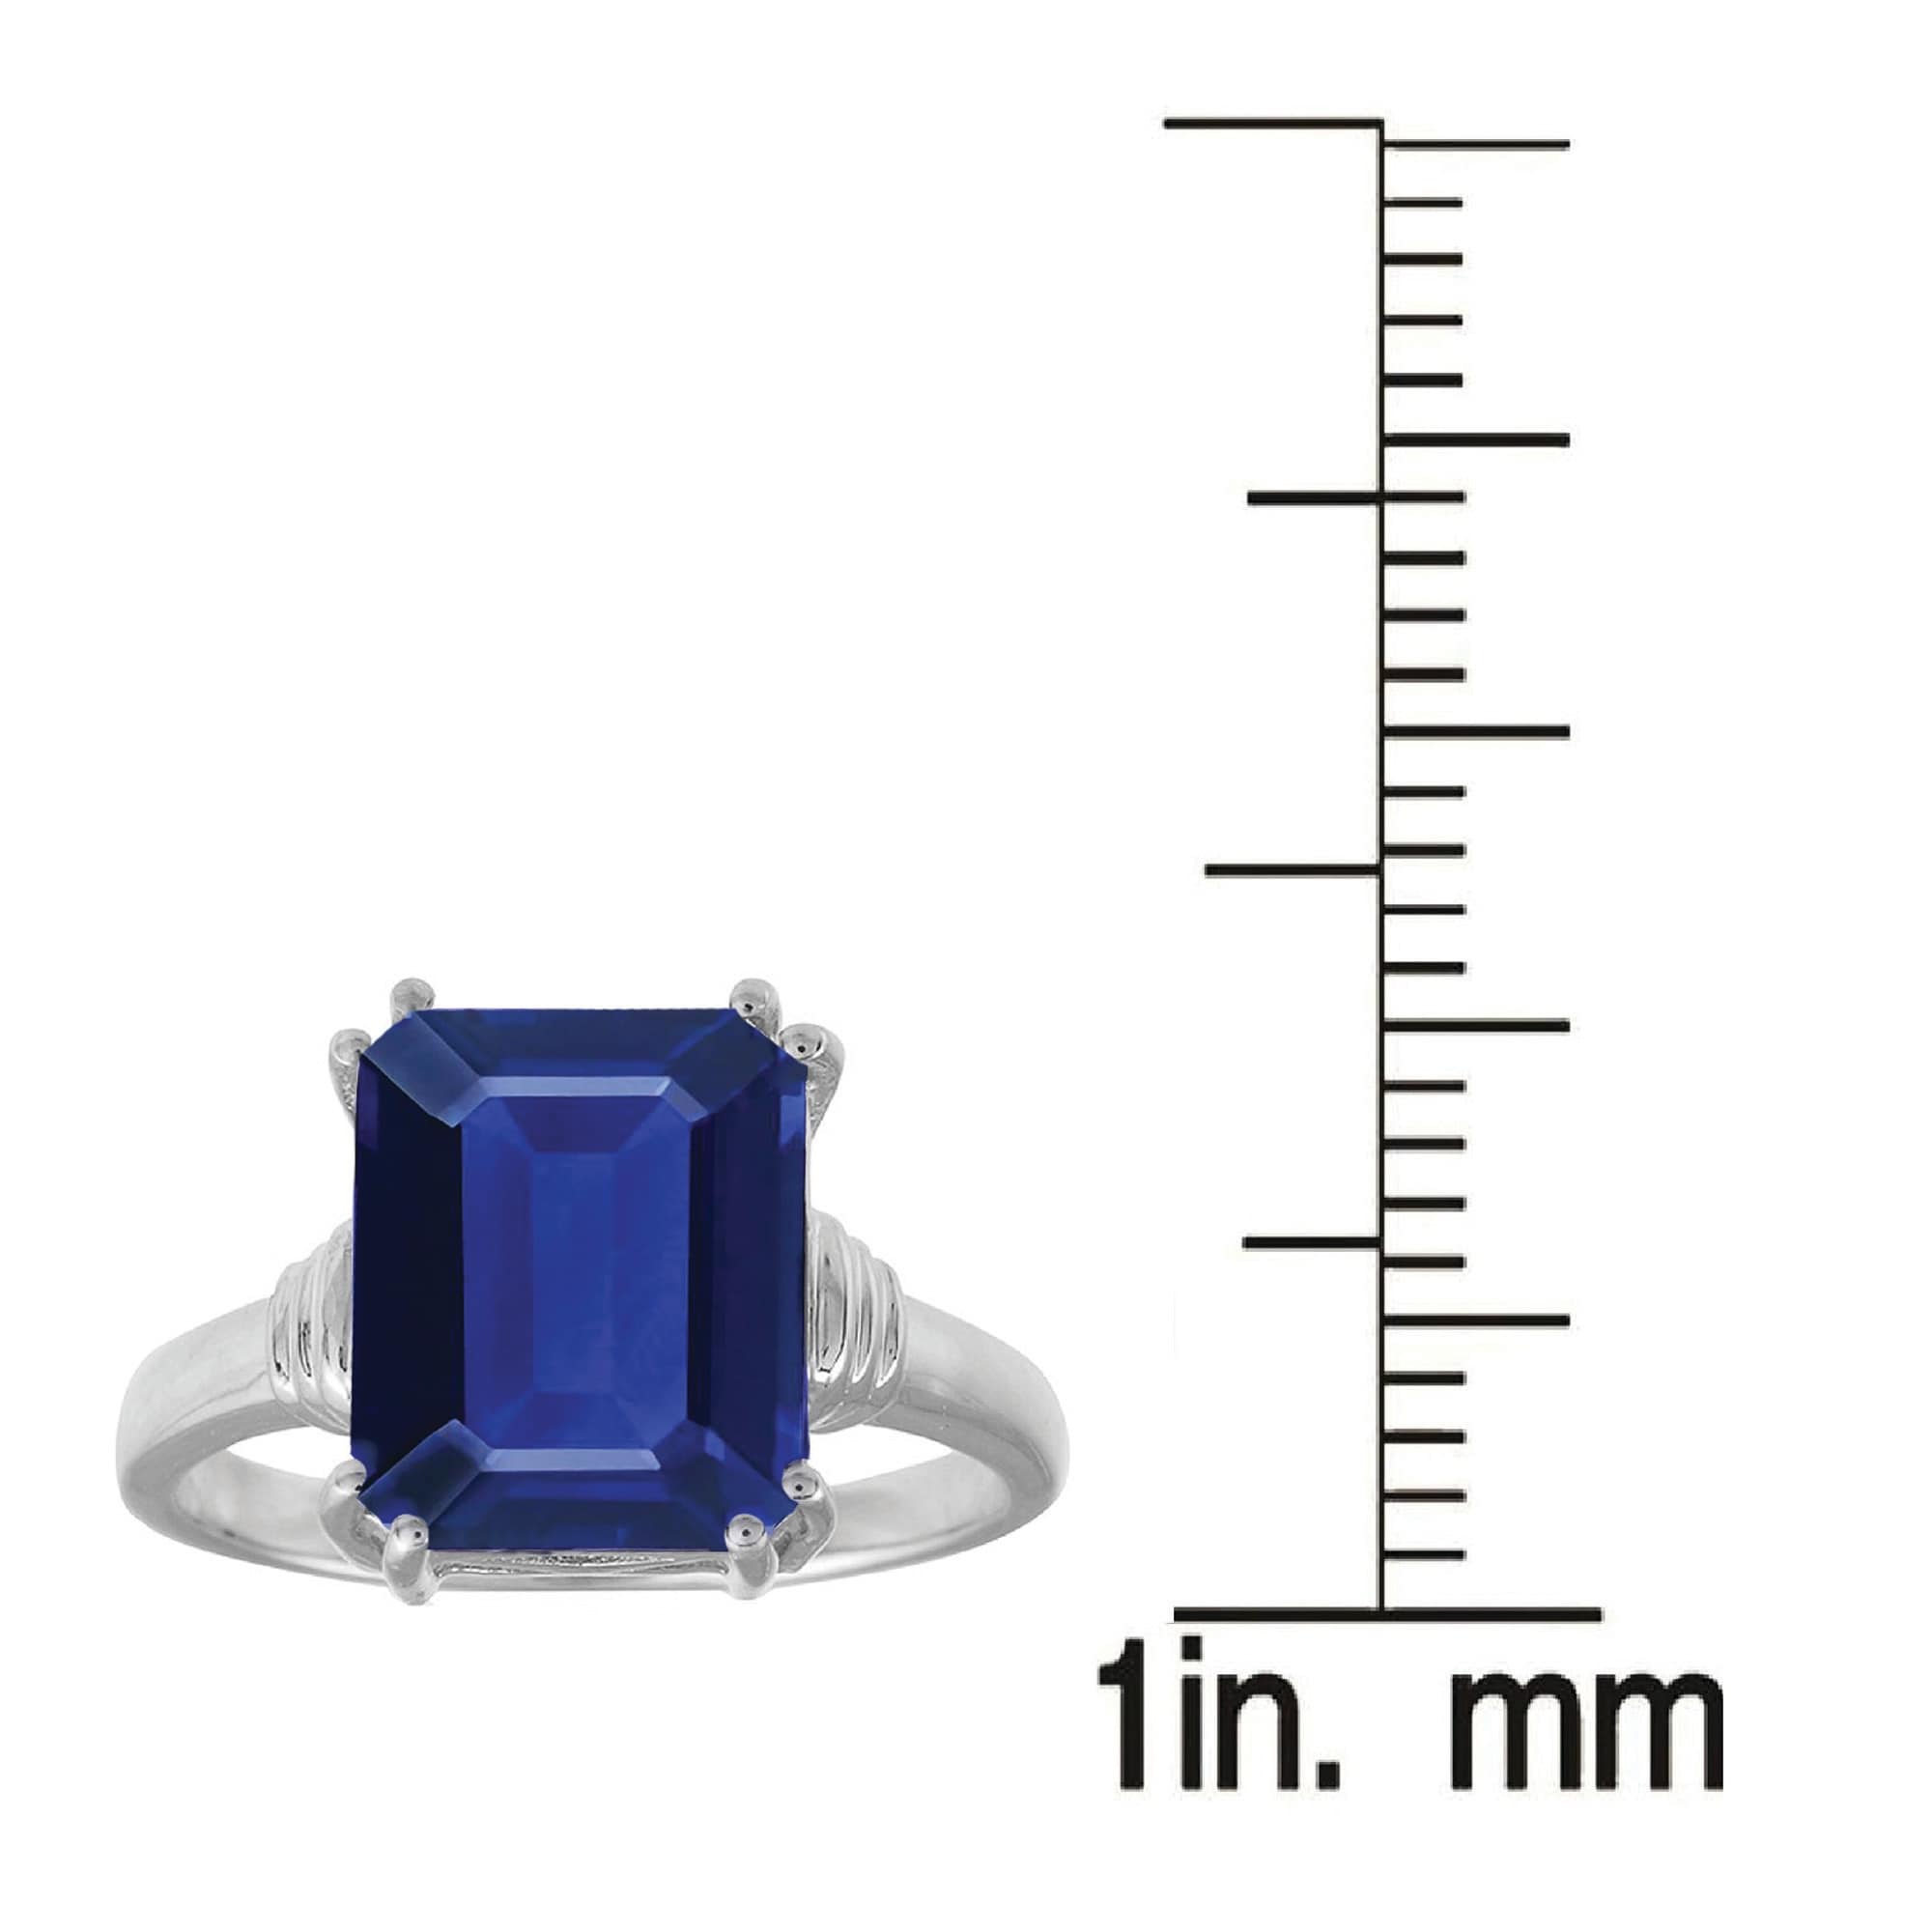 Details about  / Natural Blue Sapphire Octagon Gemstone 925 Sterling Silver Beautiful Women Ring